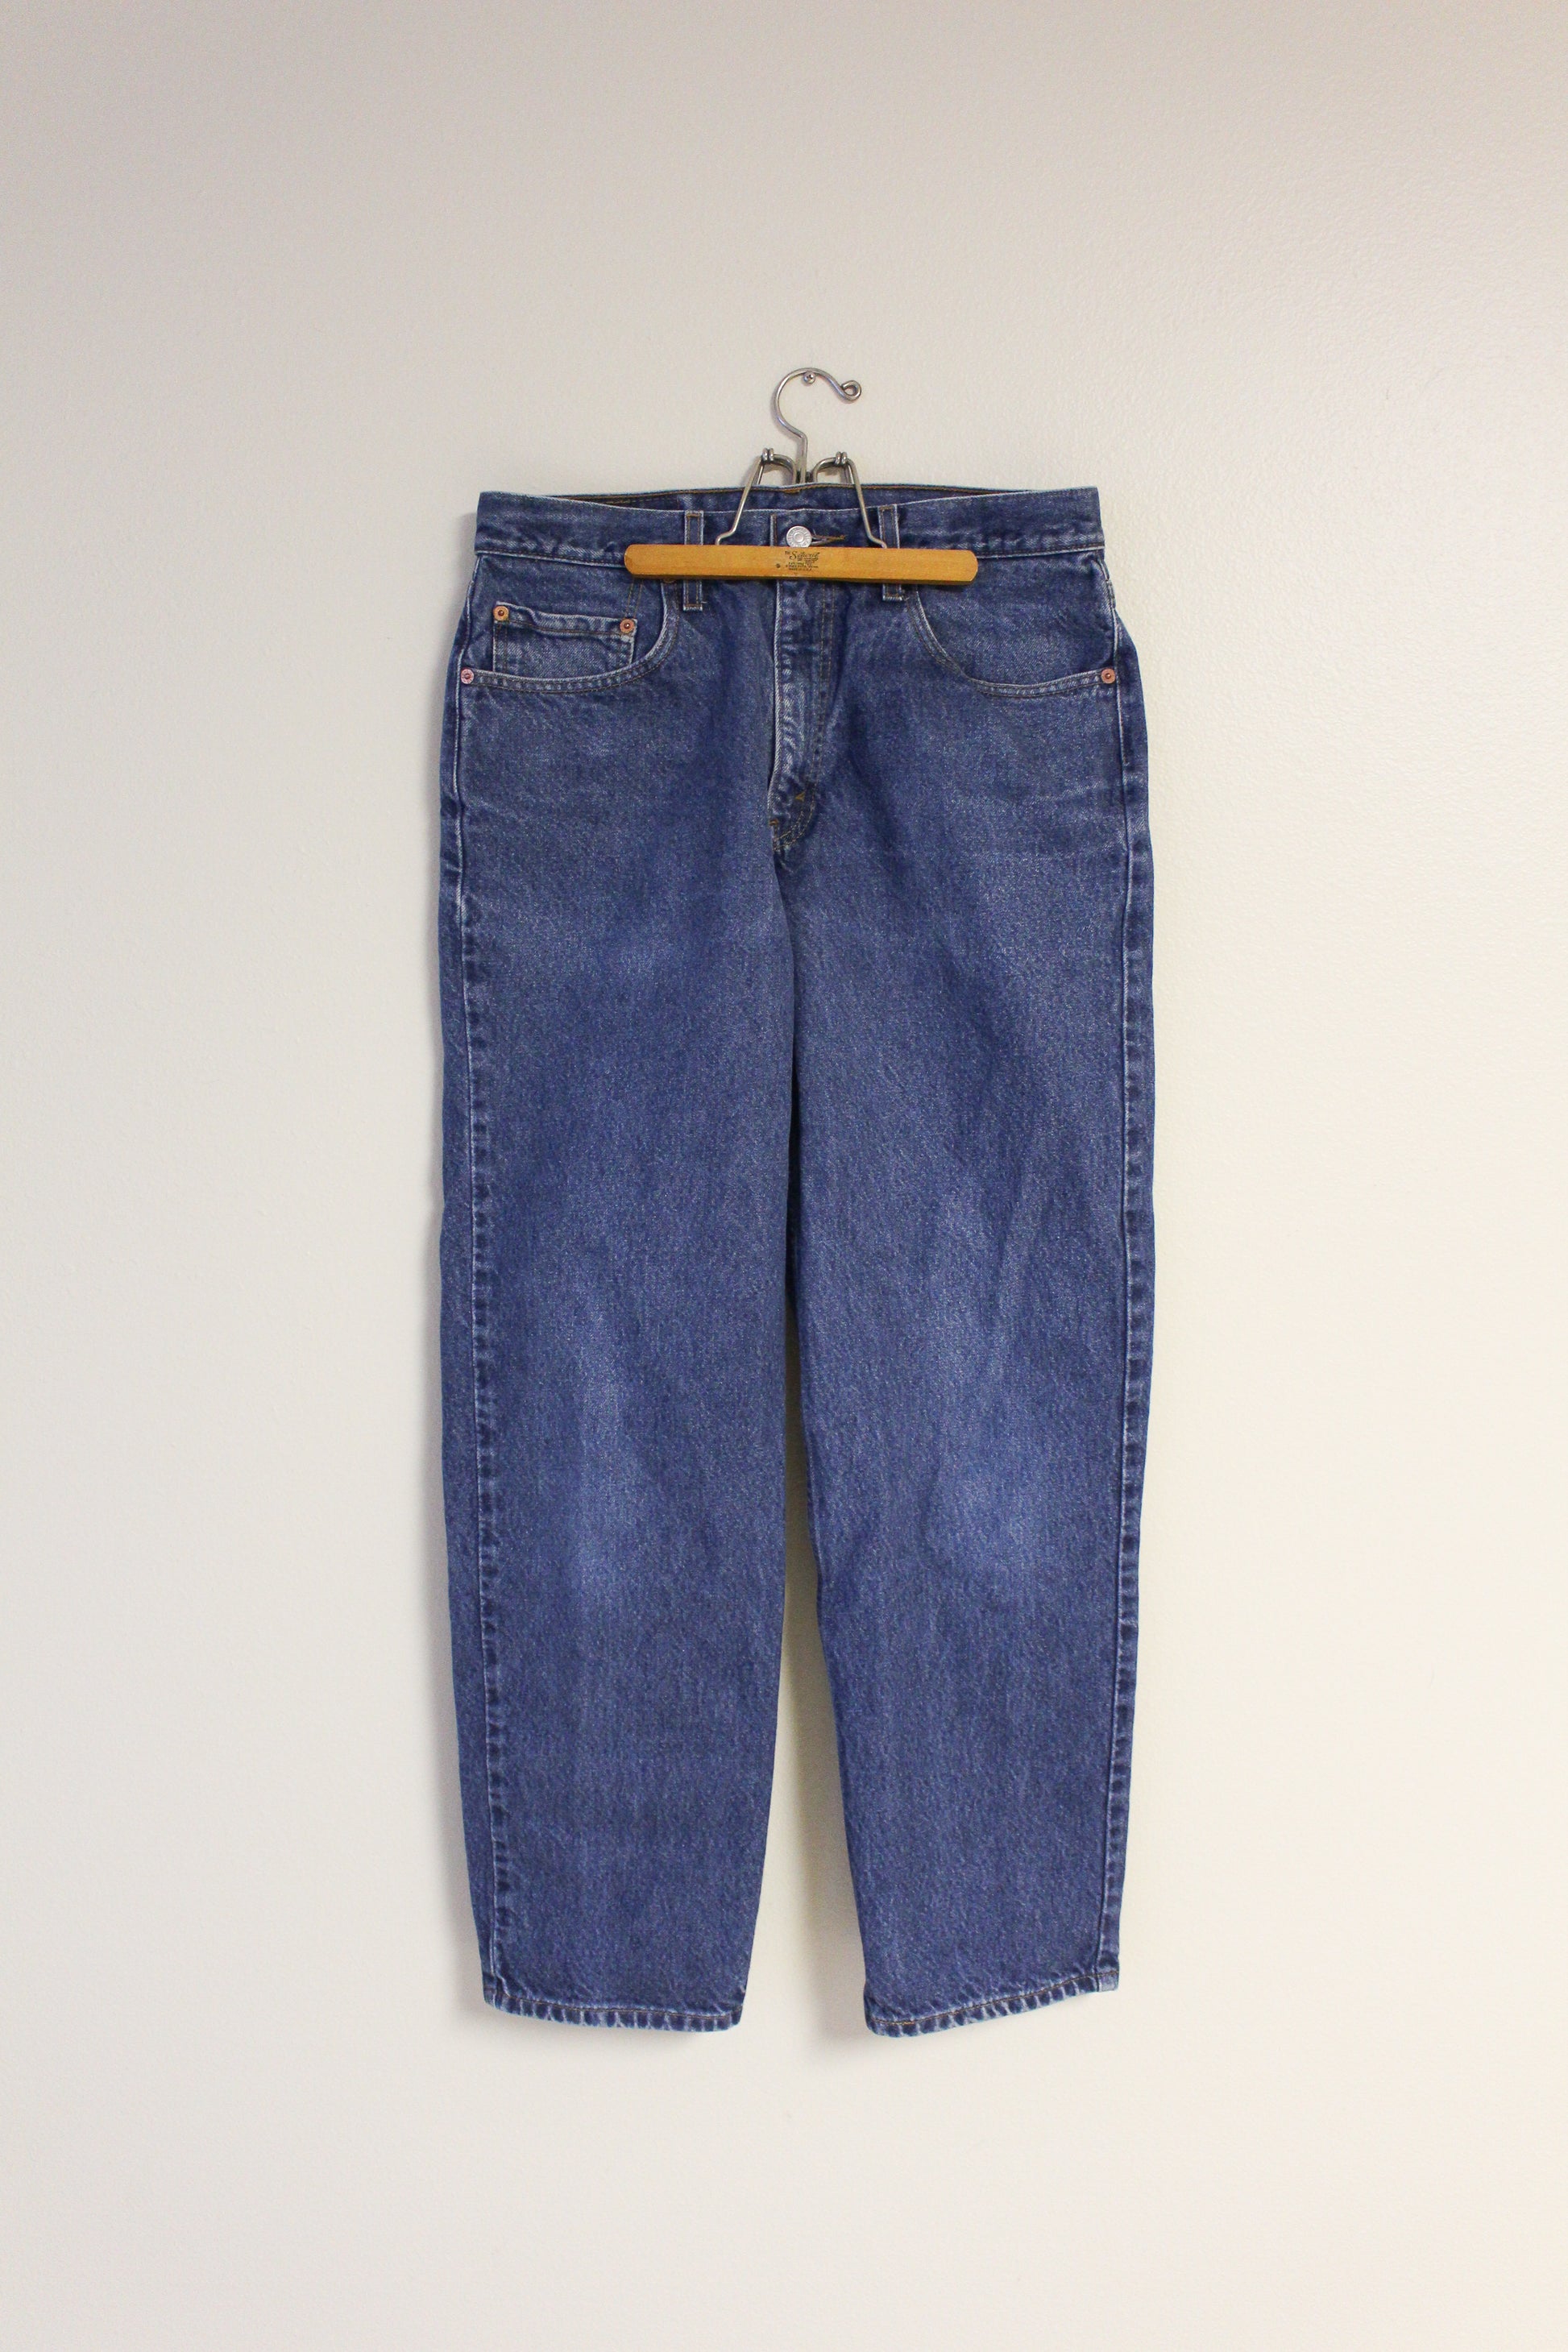 vintage red tab Levis, dark denim relaxed fit jeans 